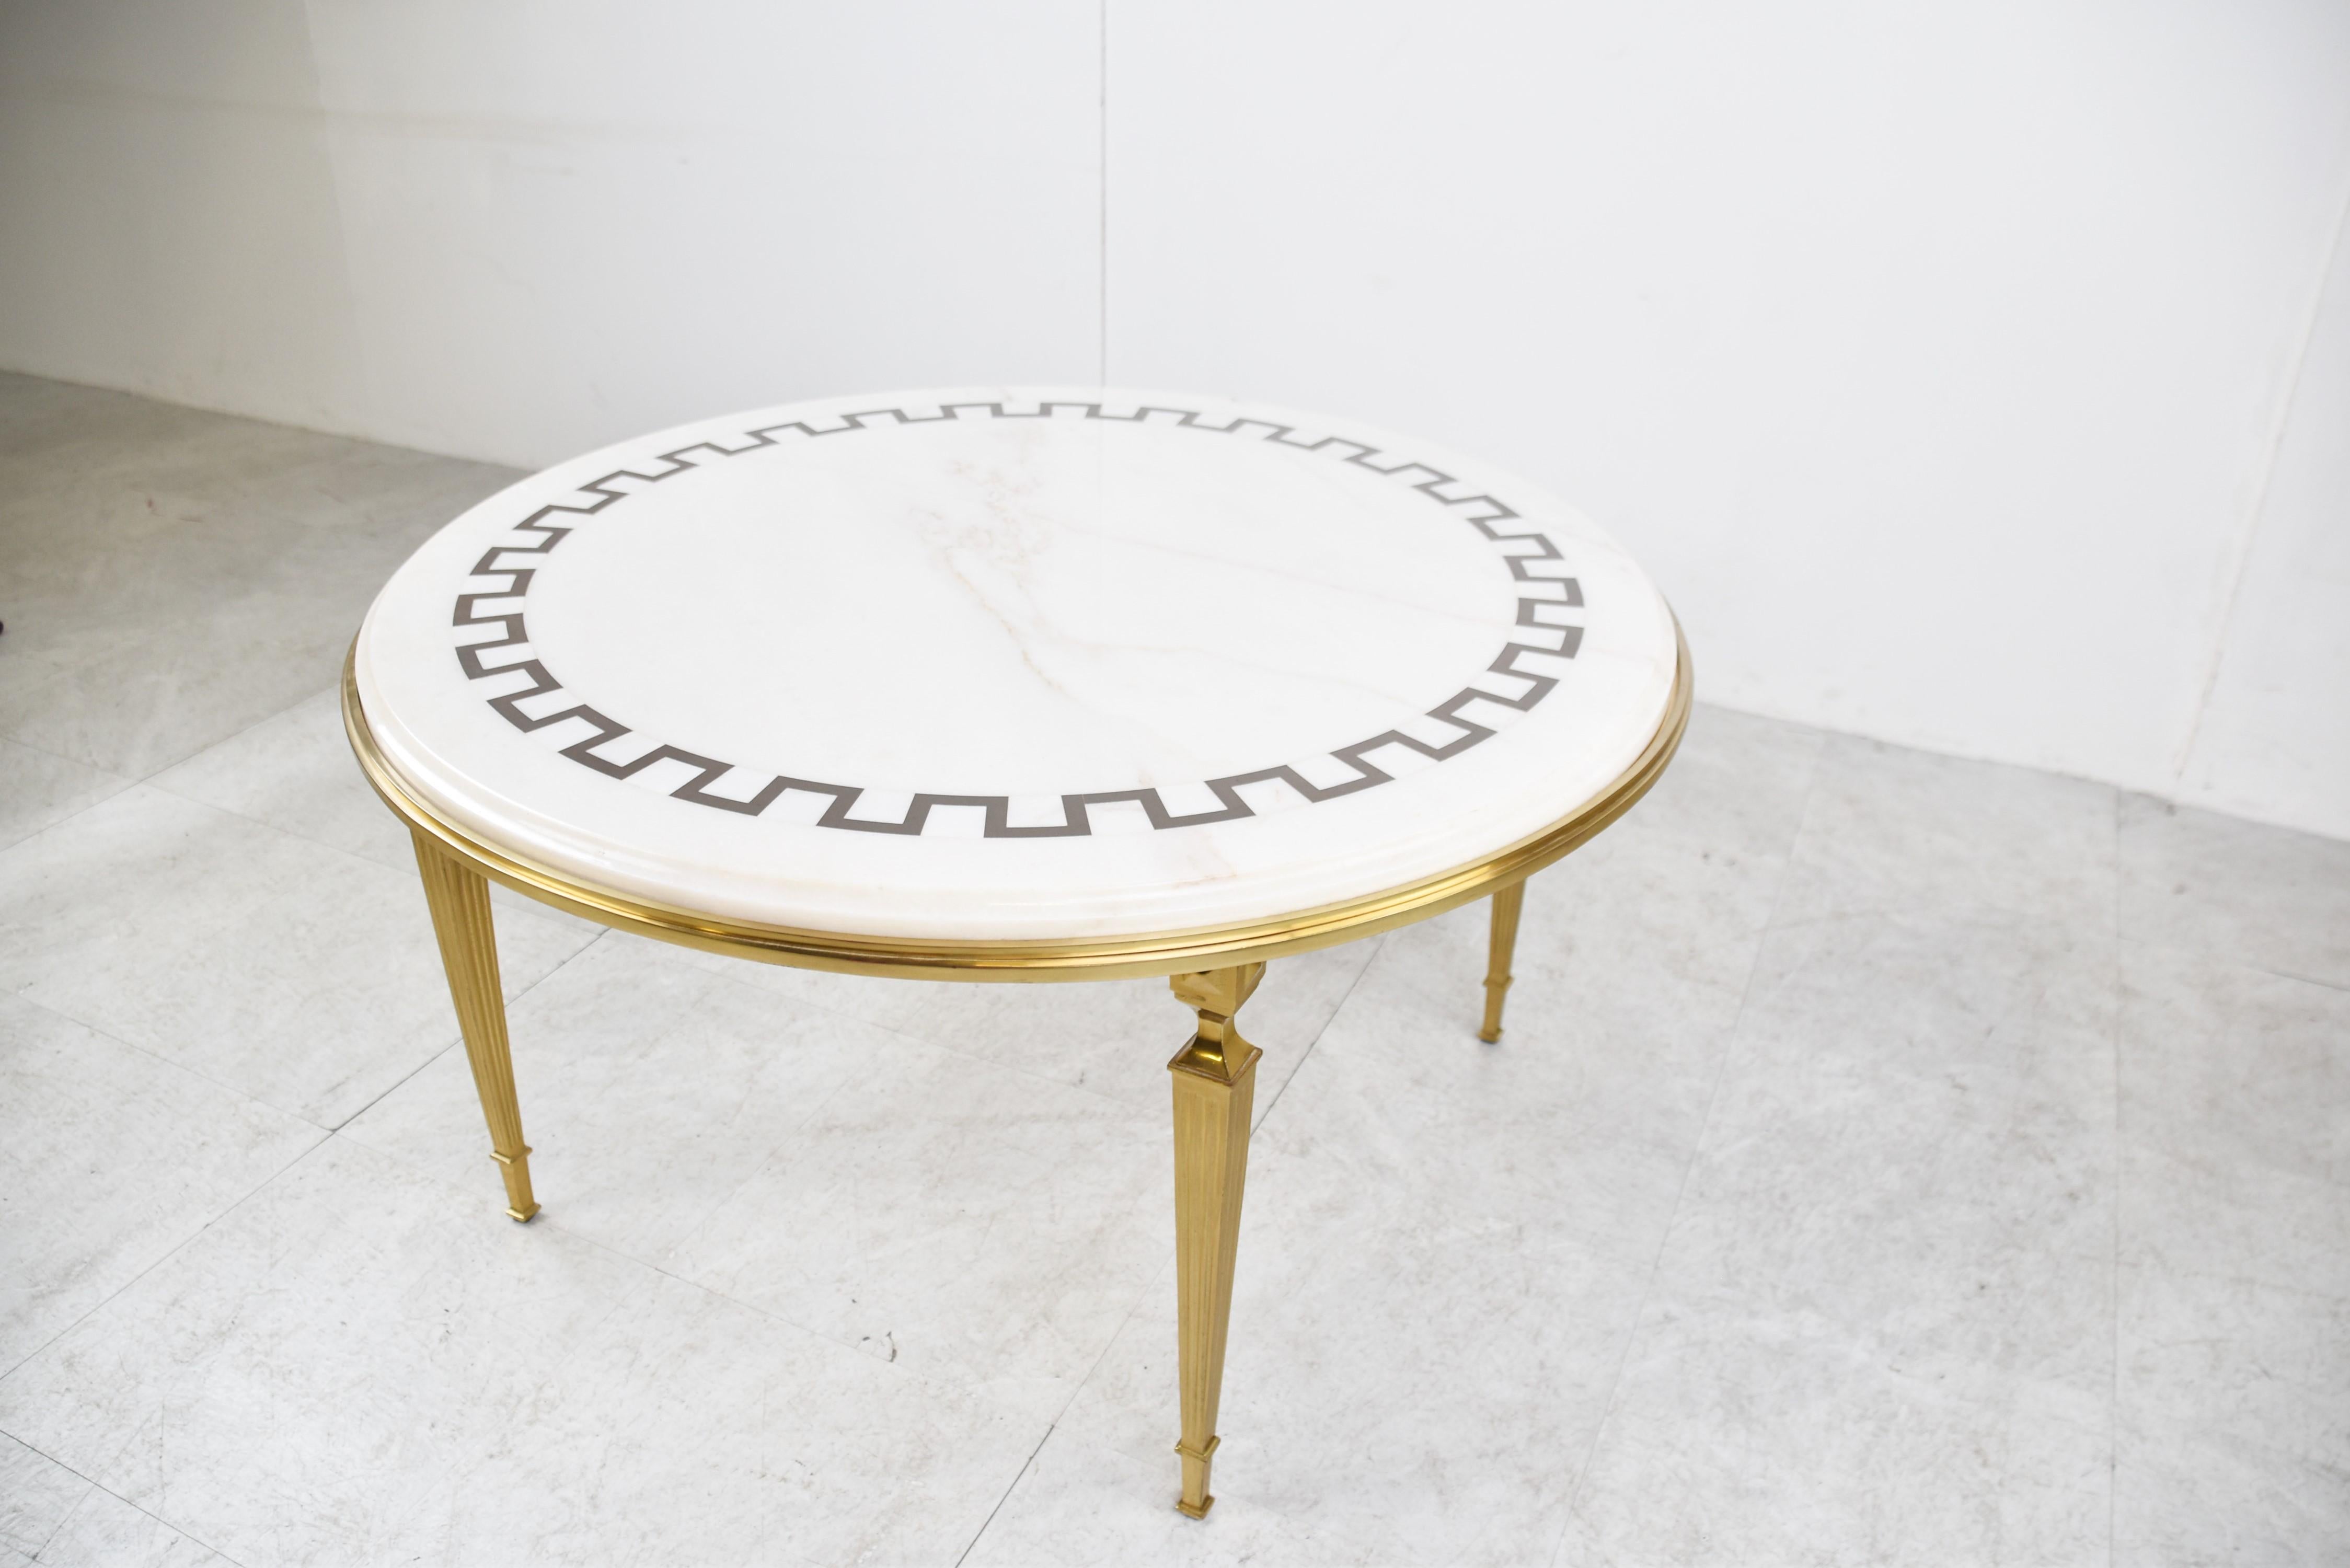 Vintage Brass and White Marble Coffee Table, 1970s For Sale 5